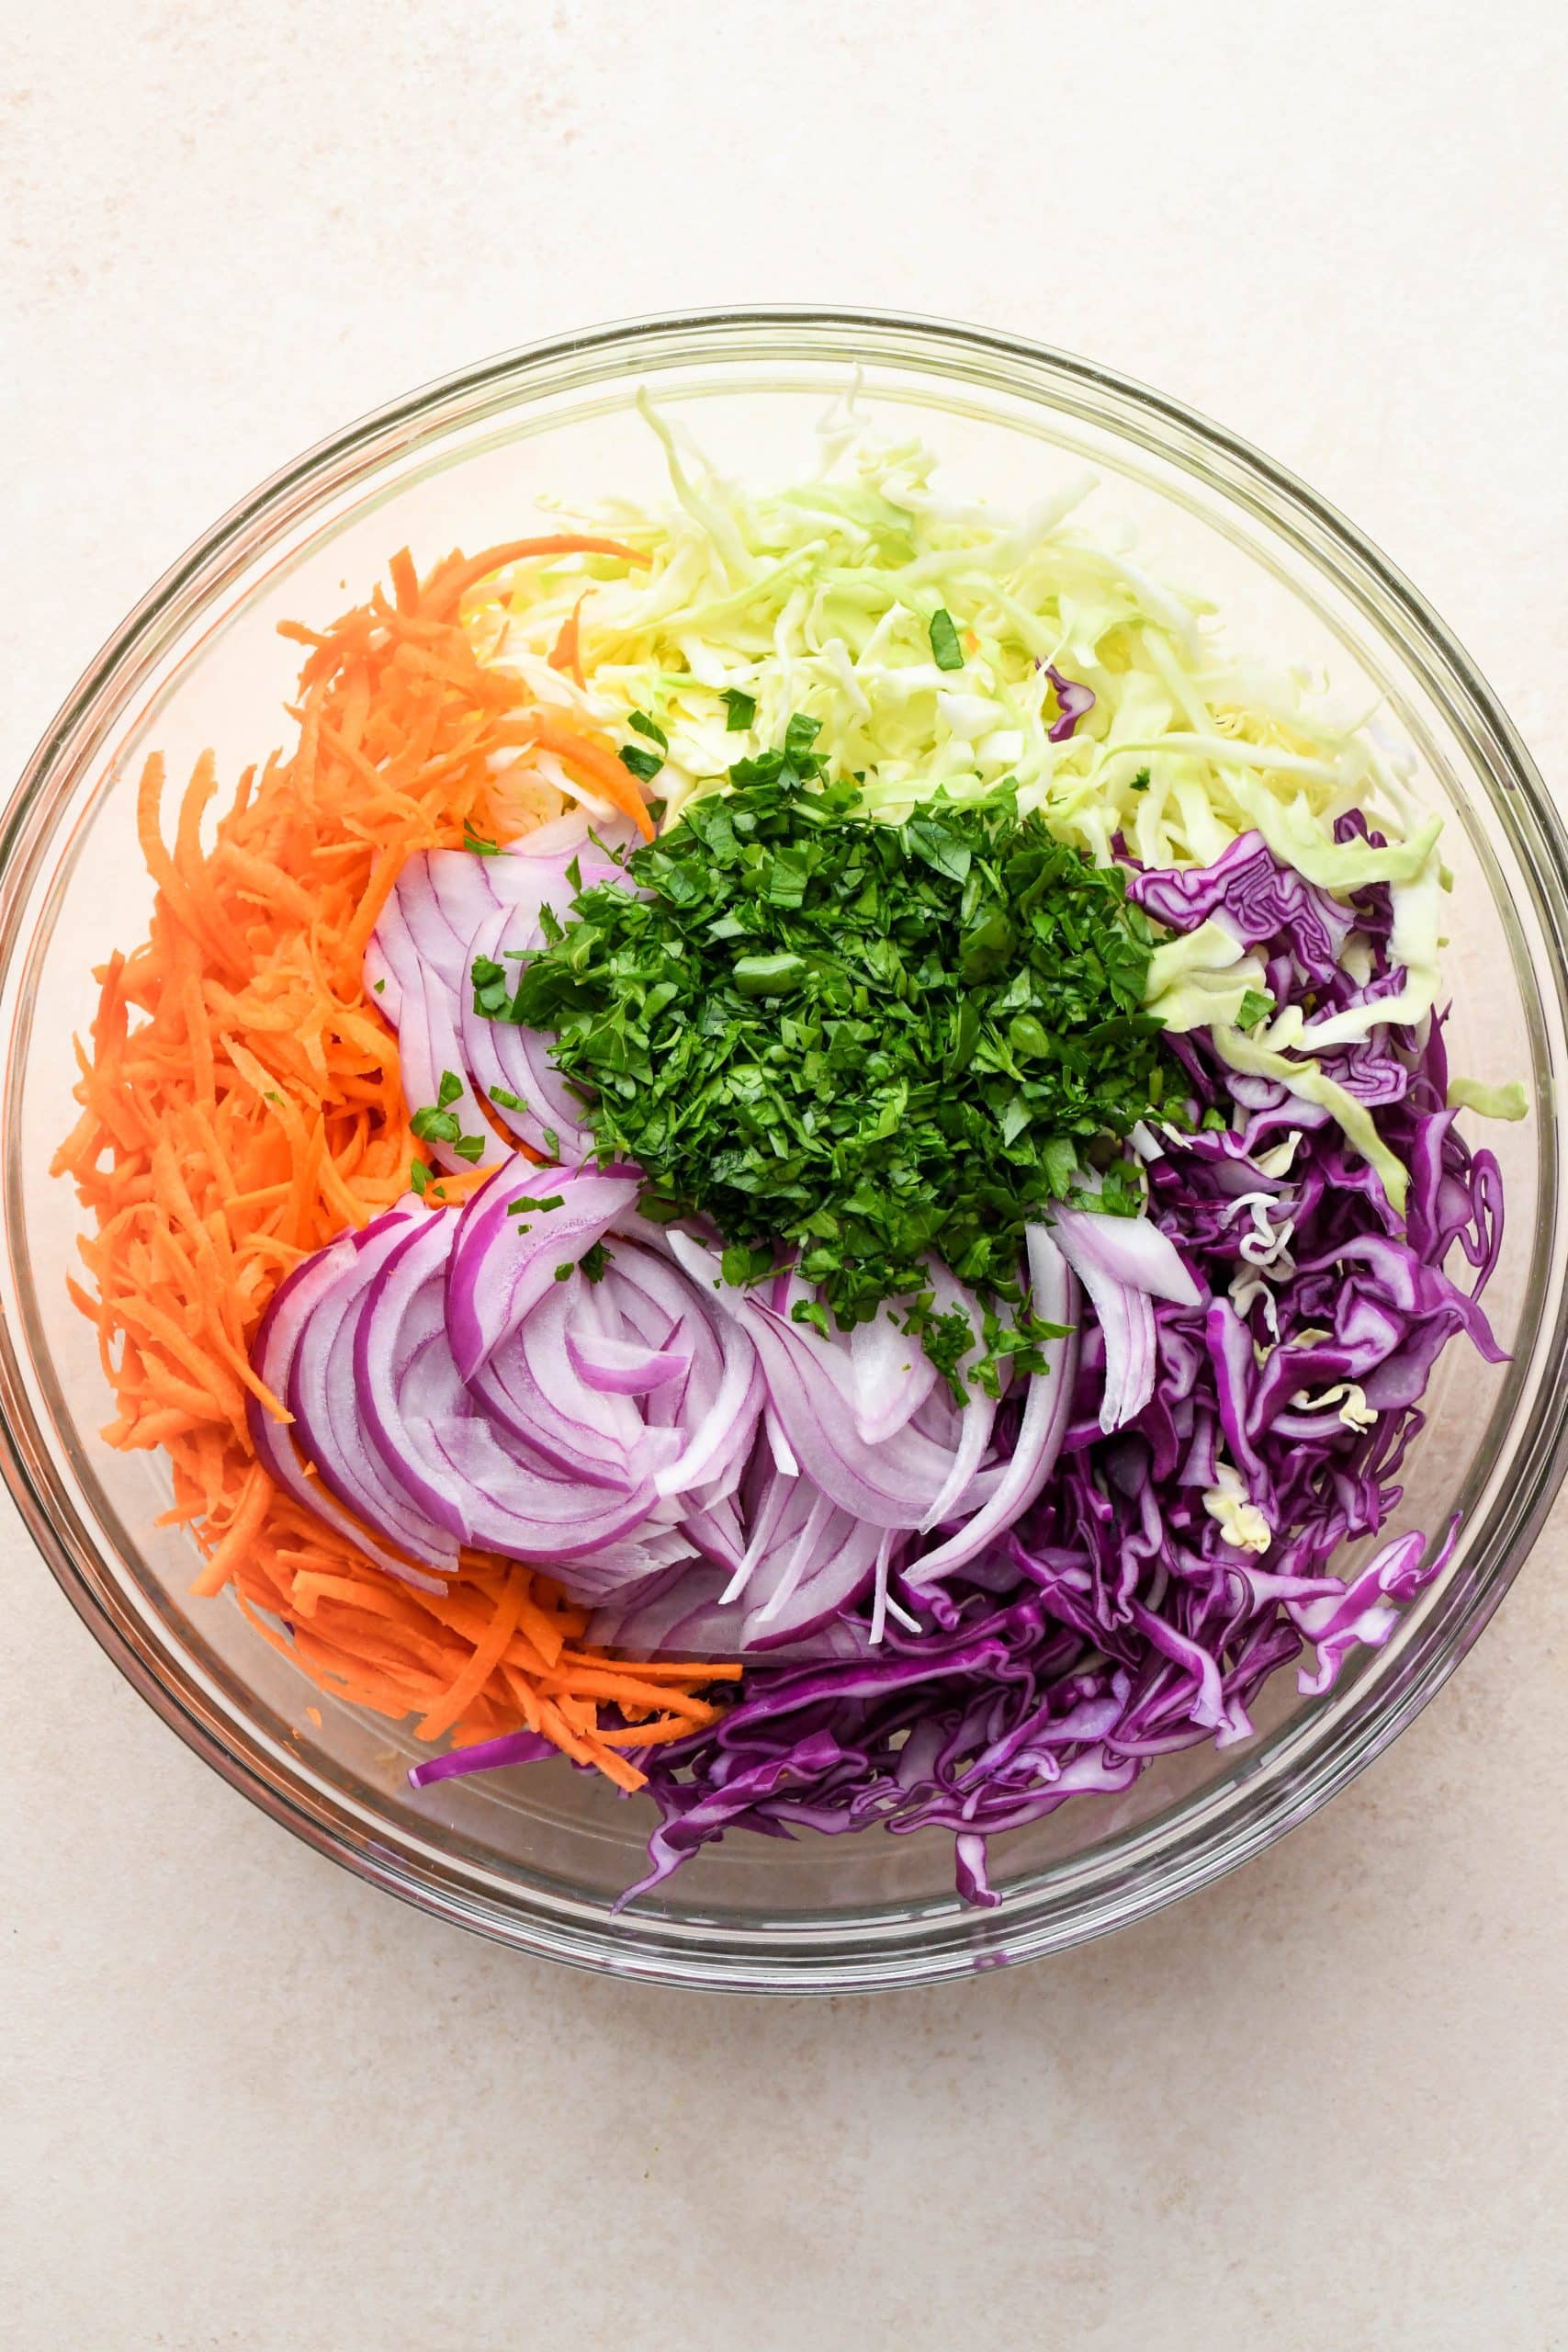 How to make Whole30 coleslaw: Fresh slaw ingredients added to the same glass bowl with the coleslaw dressing.